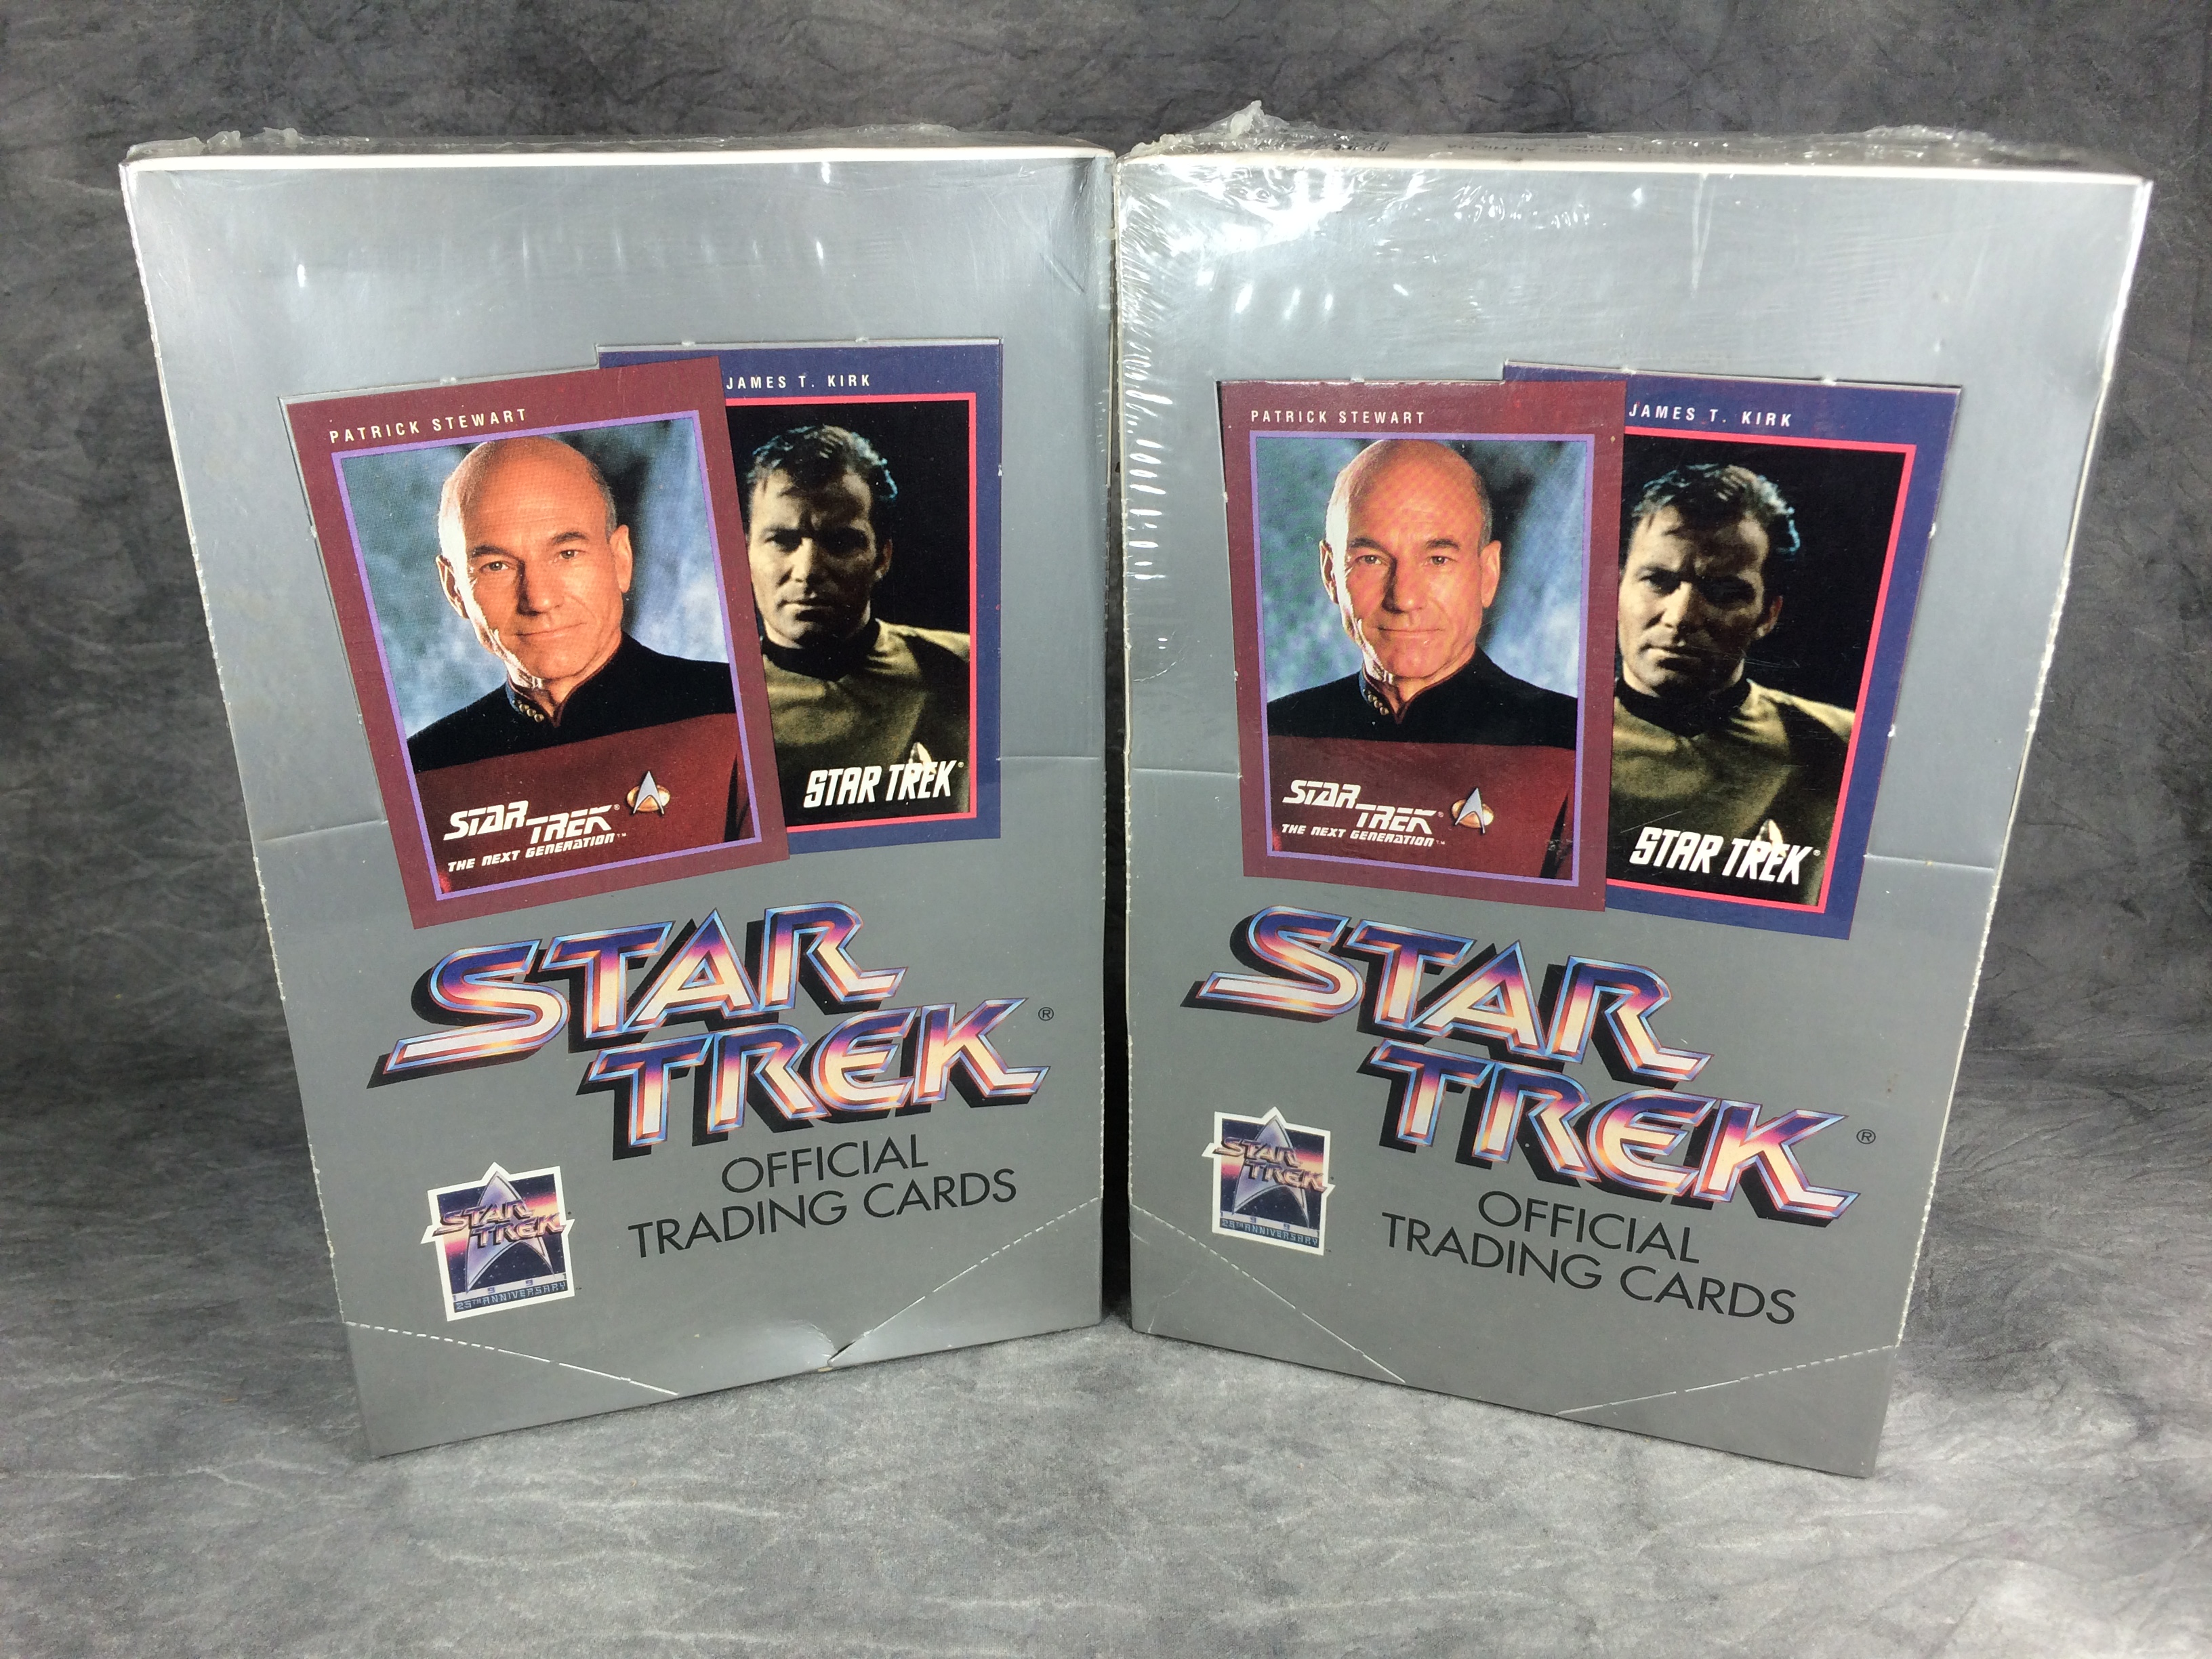 Value of STAR TREK 25th Anniv. Trading Cards 2 Sealed Boxes (Impel, Series 1, 1991) | iGuide.net